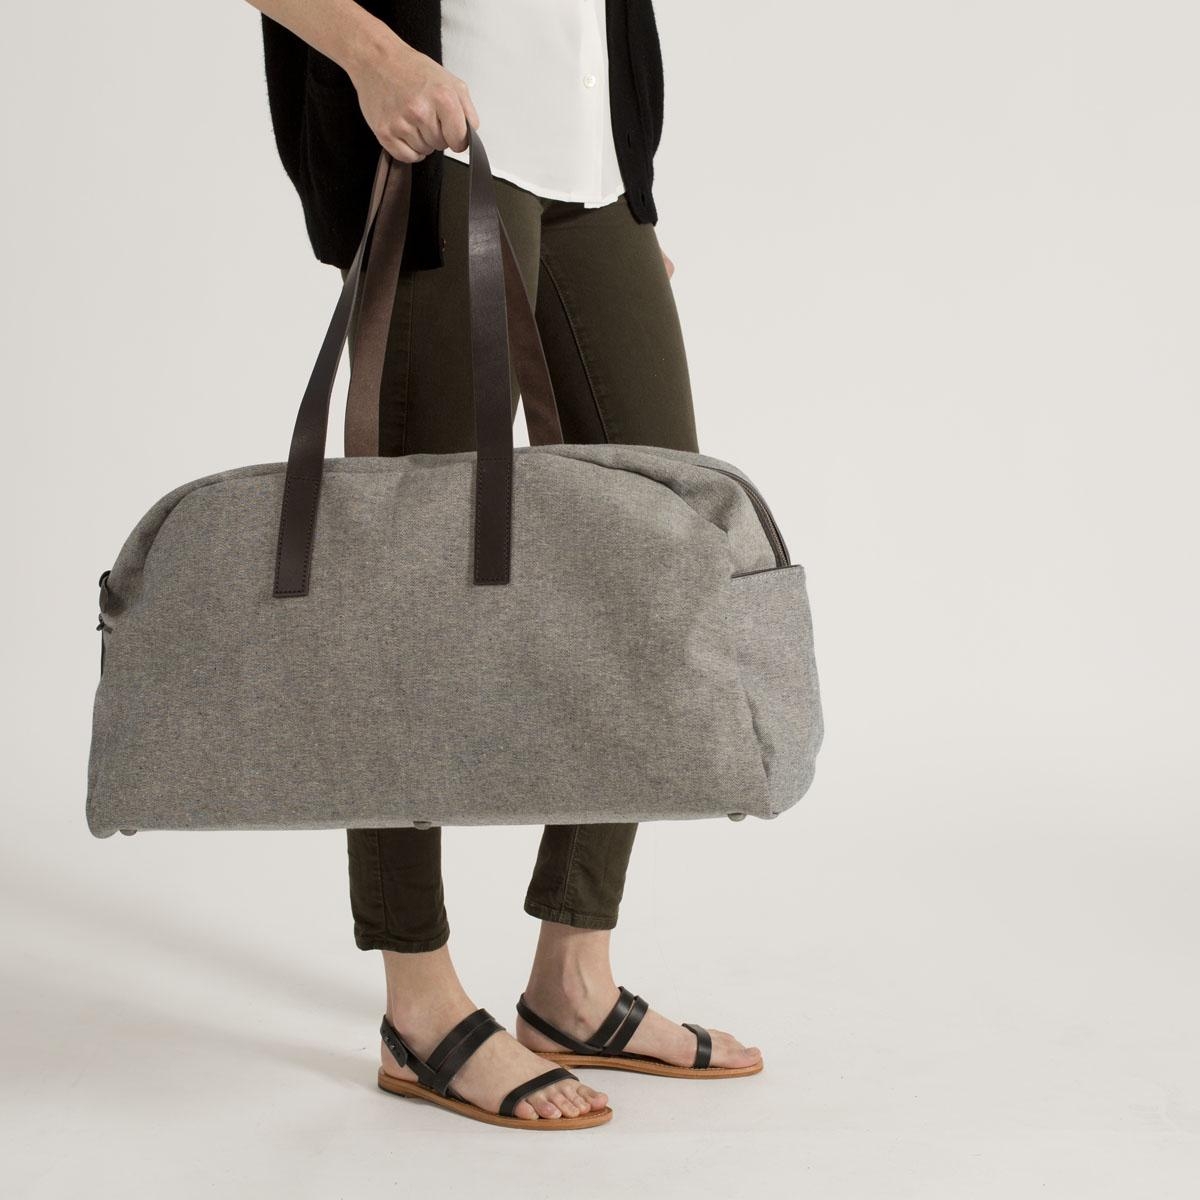 The Twill Weekender